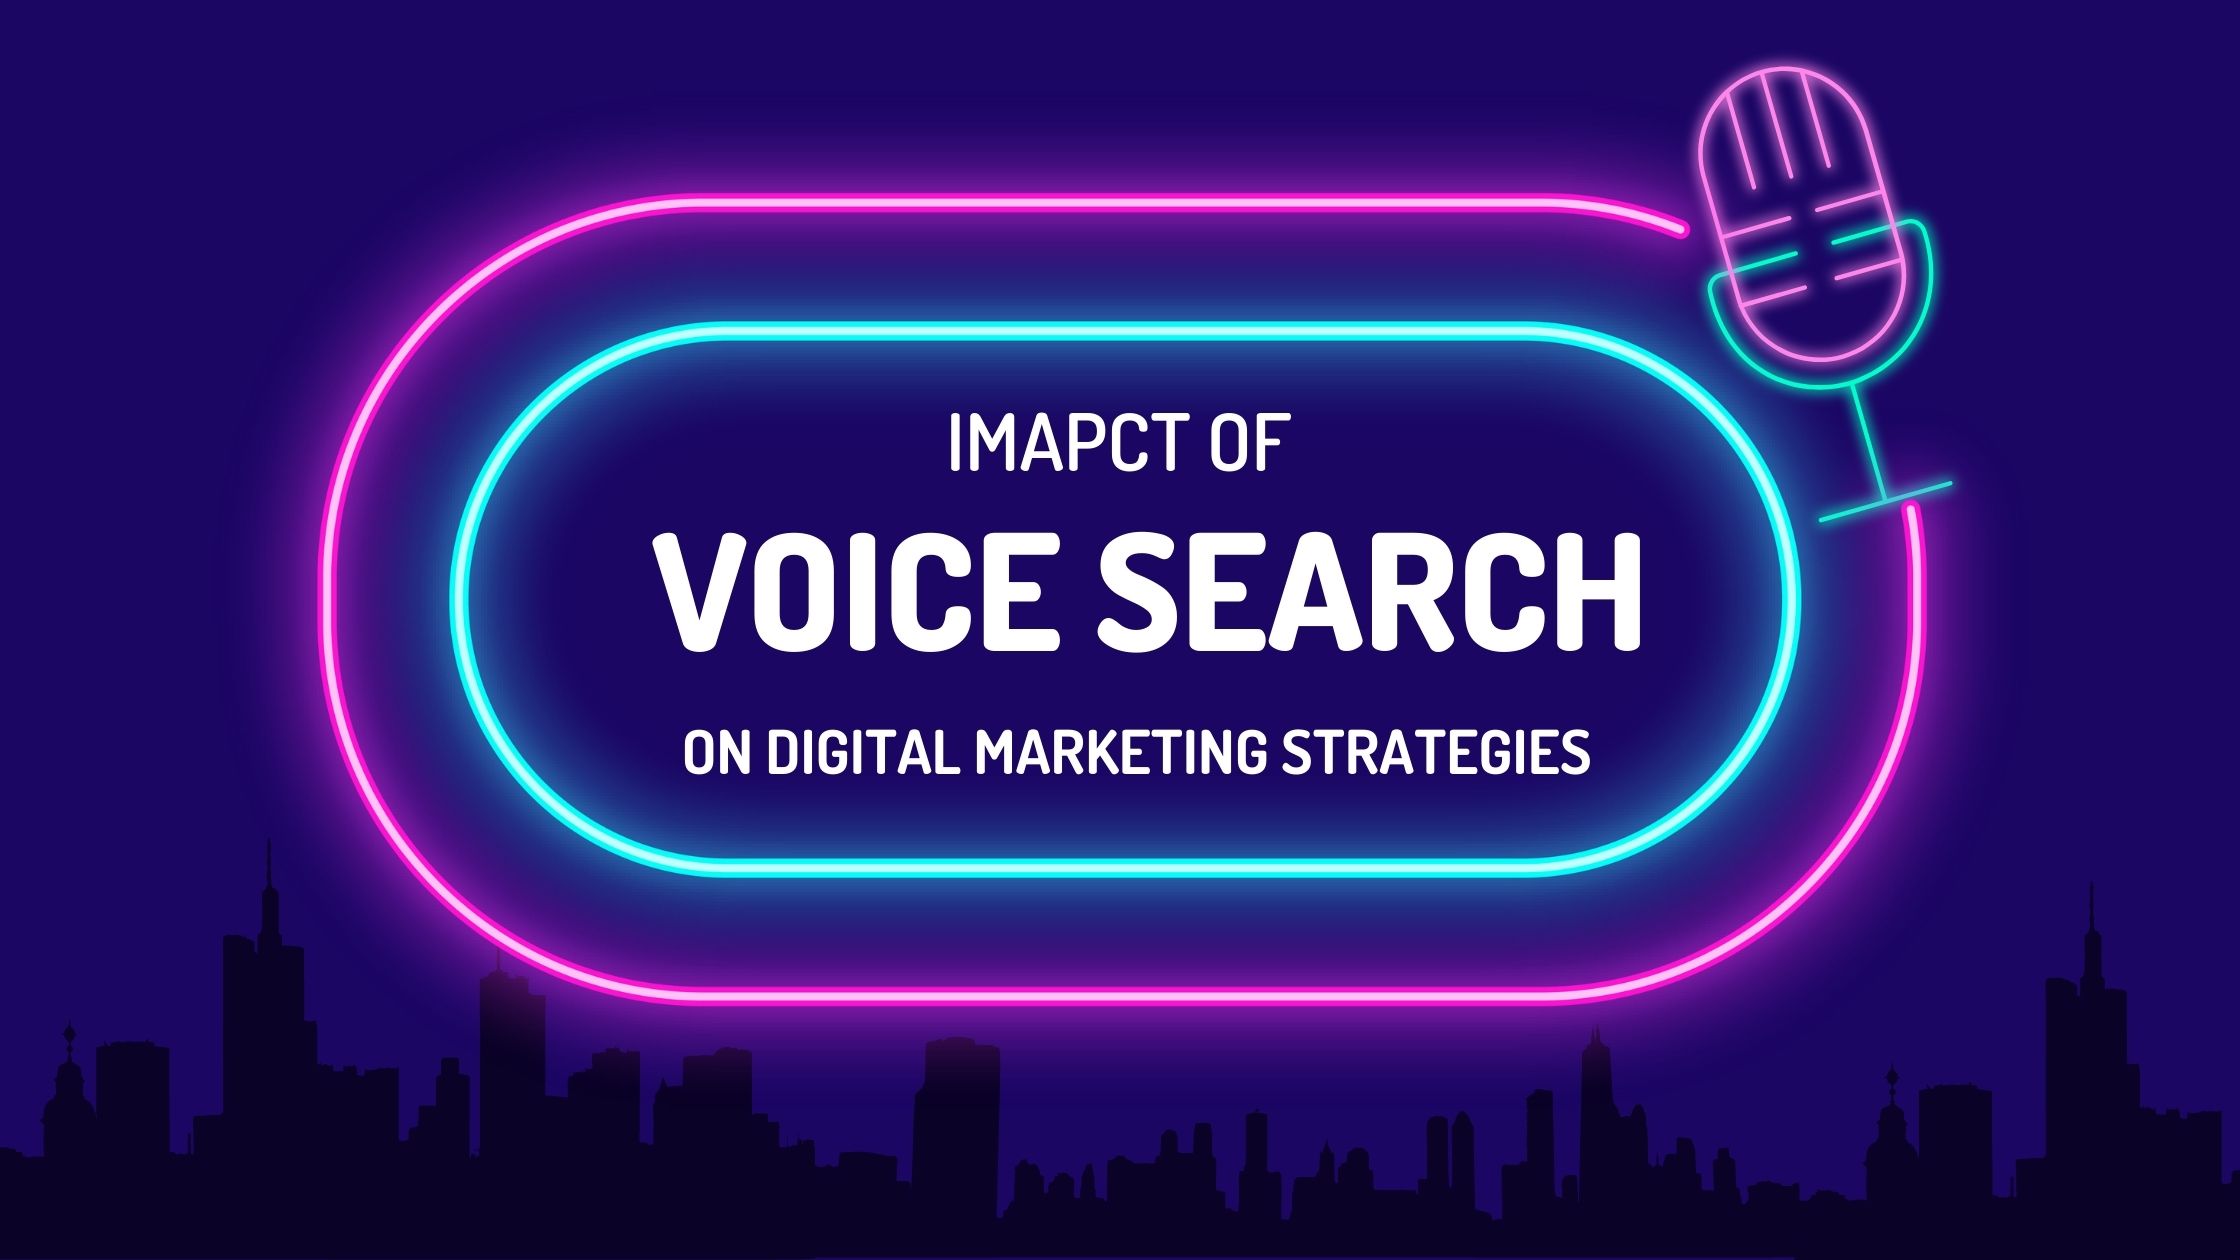 Impact of Voice Search on Digital Marketing Strategies